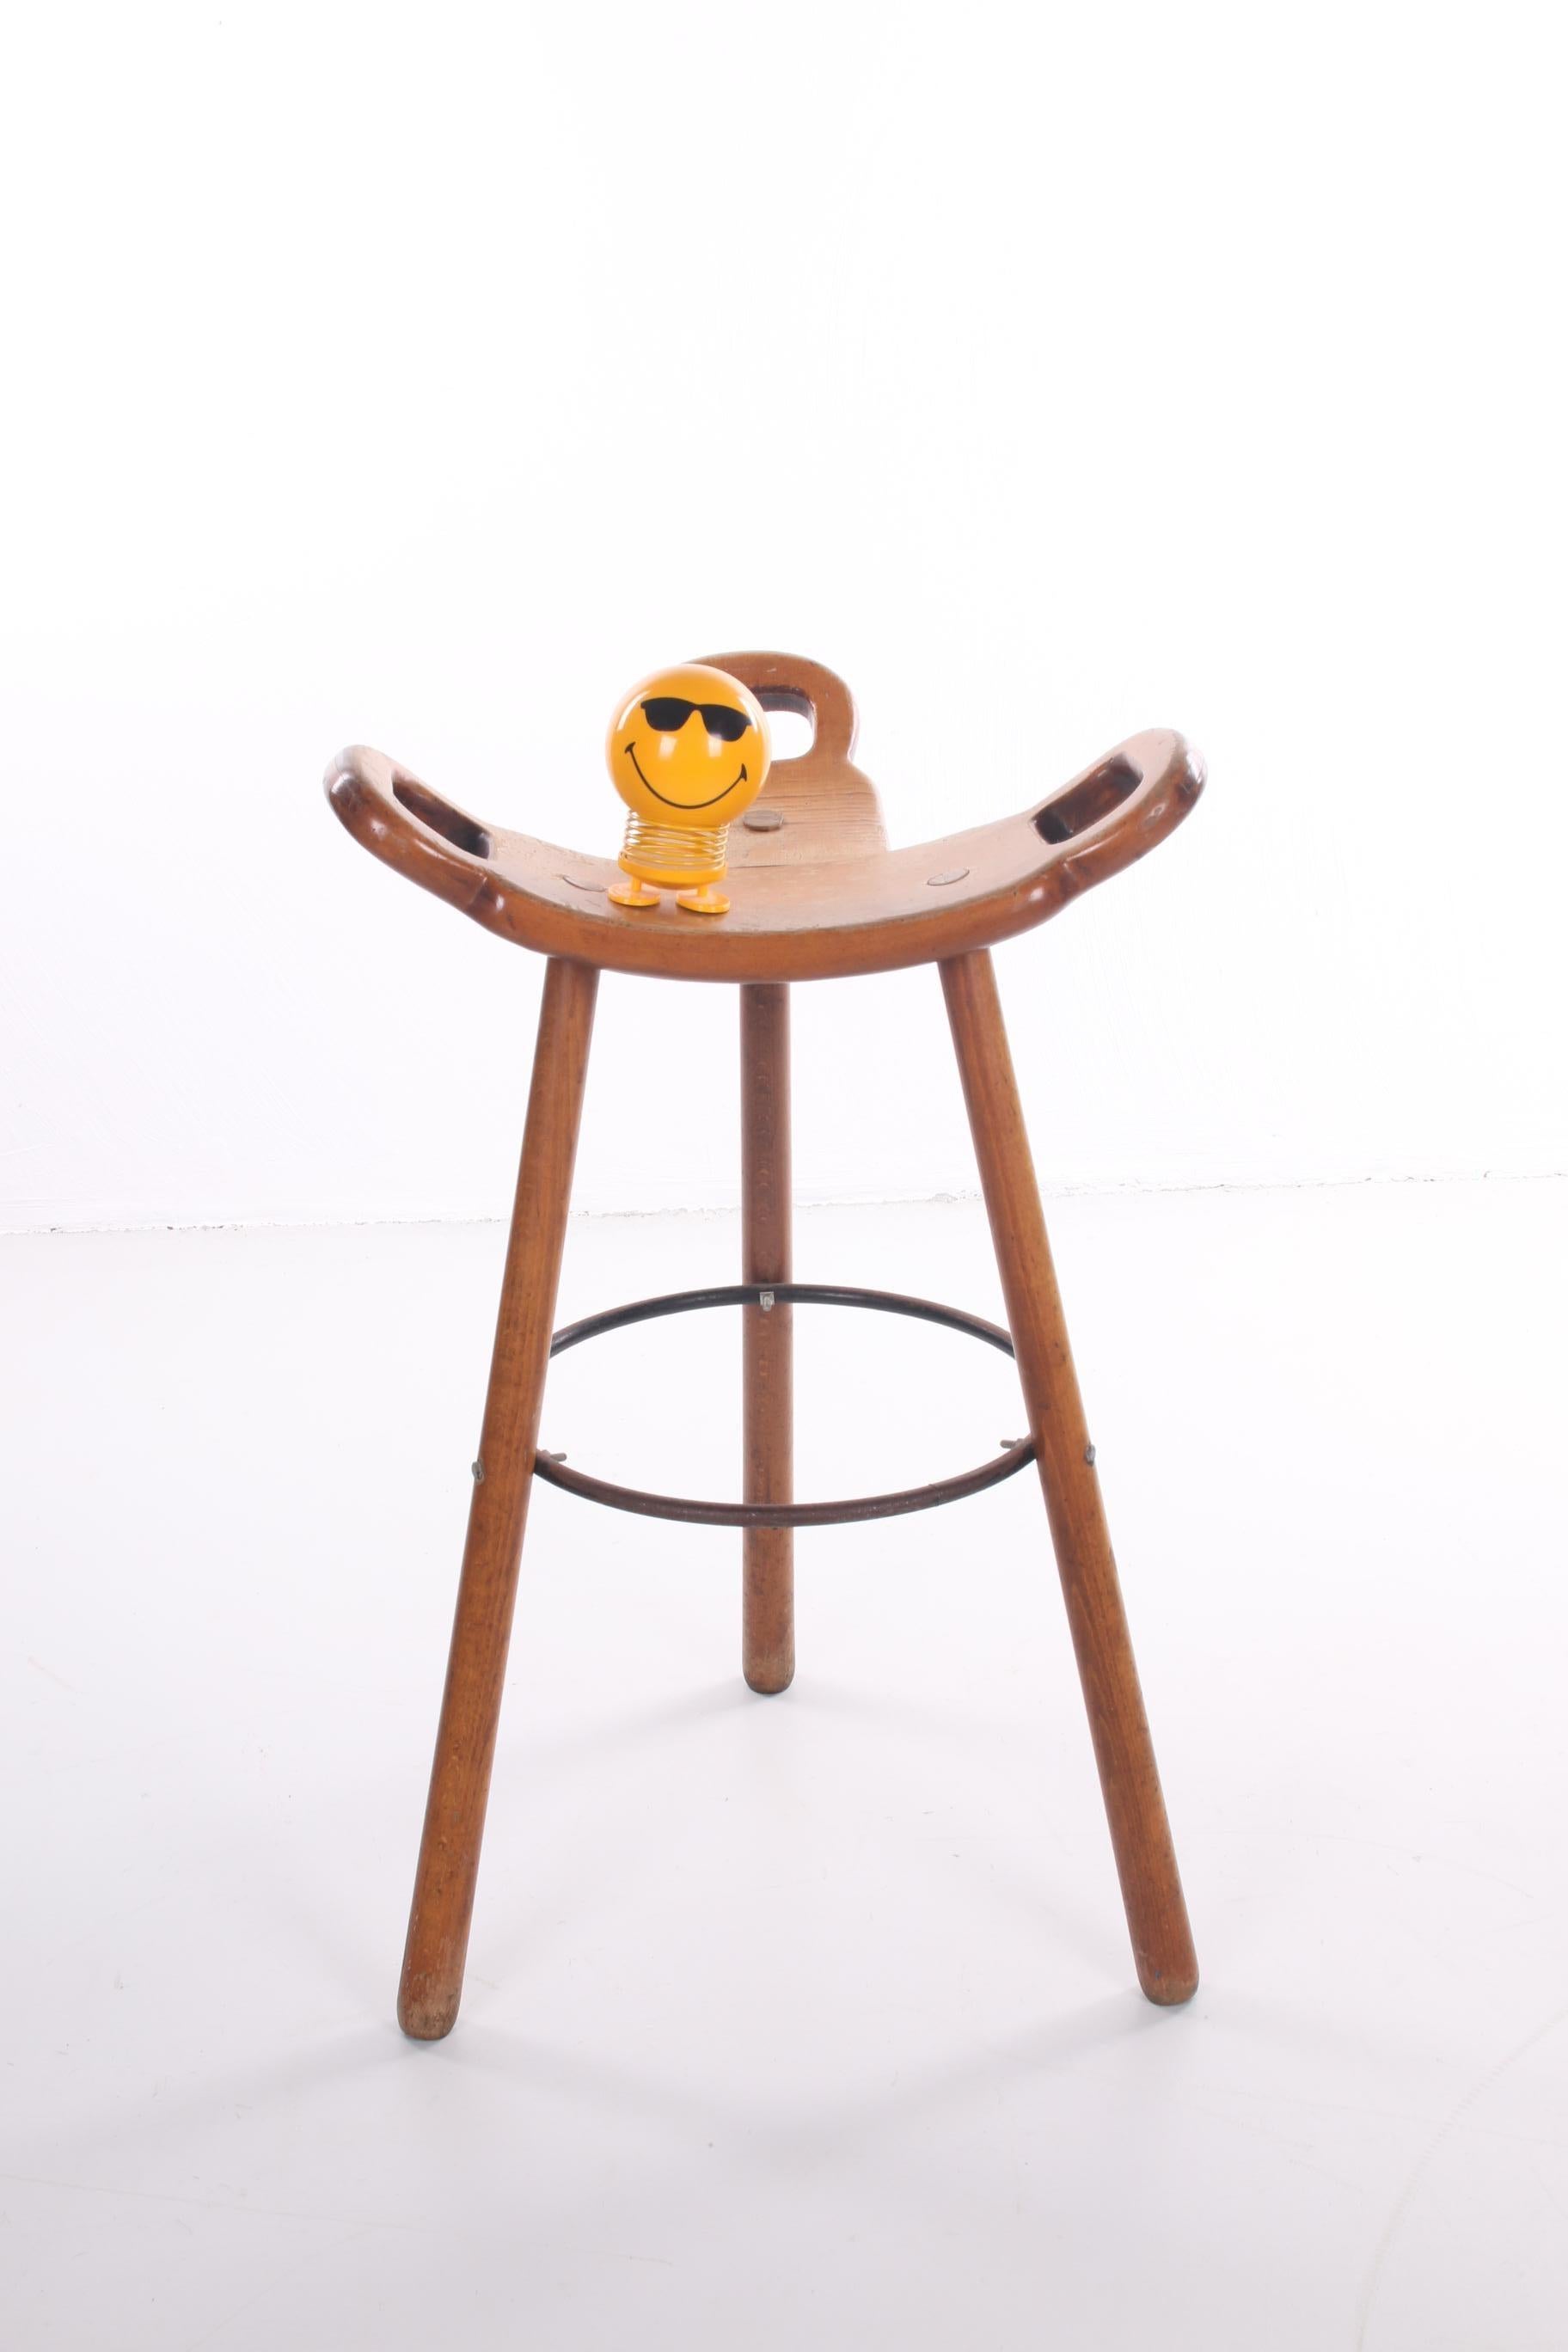 This is a nice sturdy bar stool in the rustic Brutalist style. The stool comes from Spain and this particular model was produced in the 1970s.

The bar stool is made by Confonorm and the model is called 'Marbella'. The stool is made of oak wood and